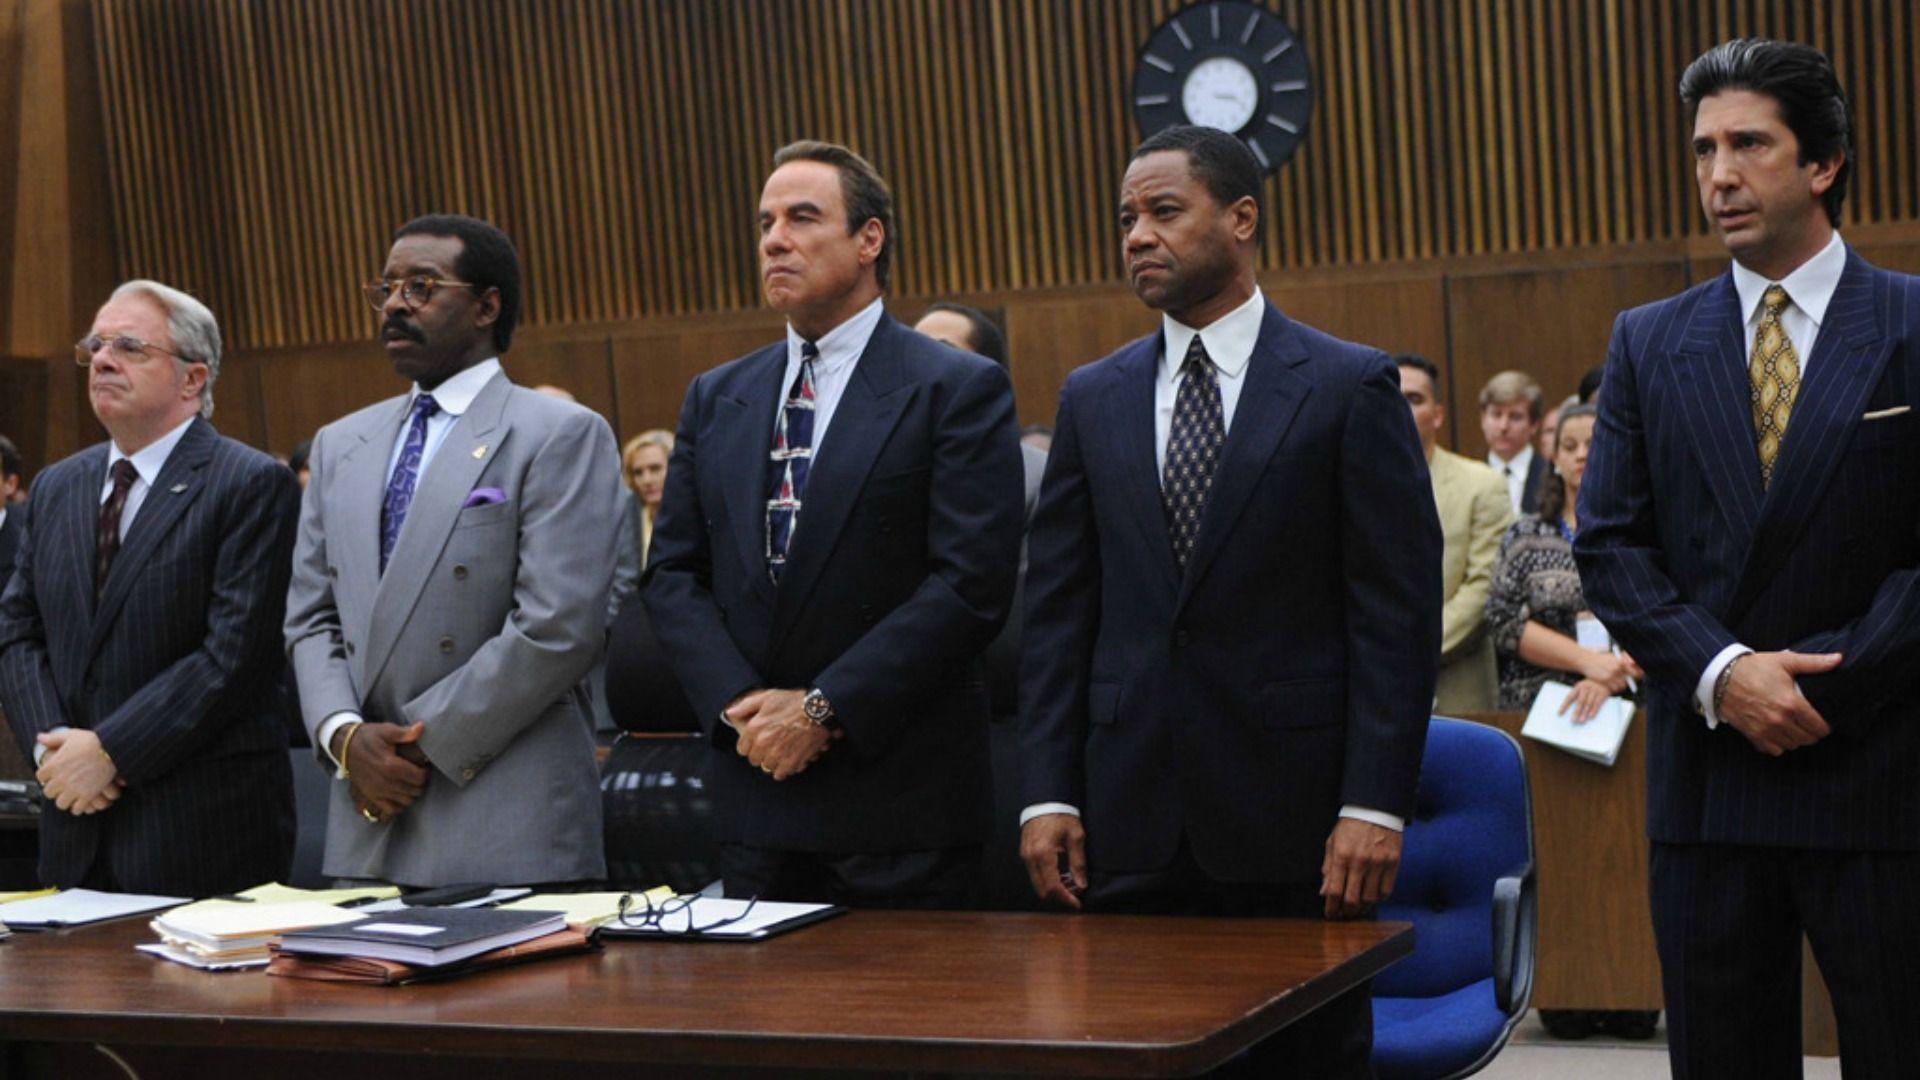 The People v. O.J. Simpson highlights huge problem in the justice